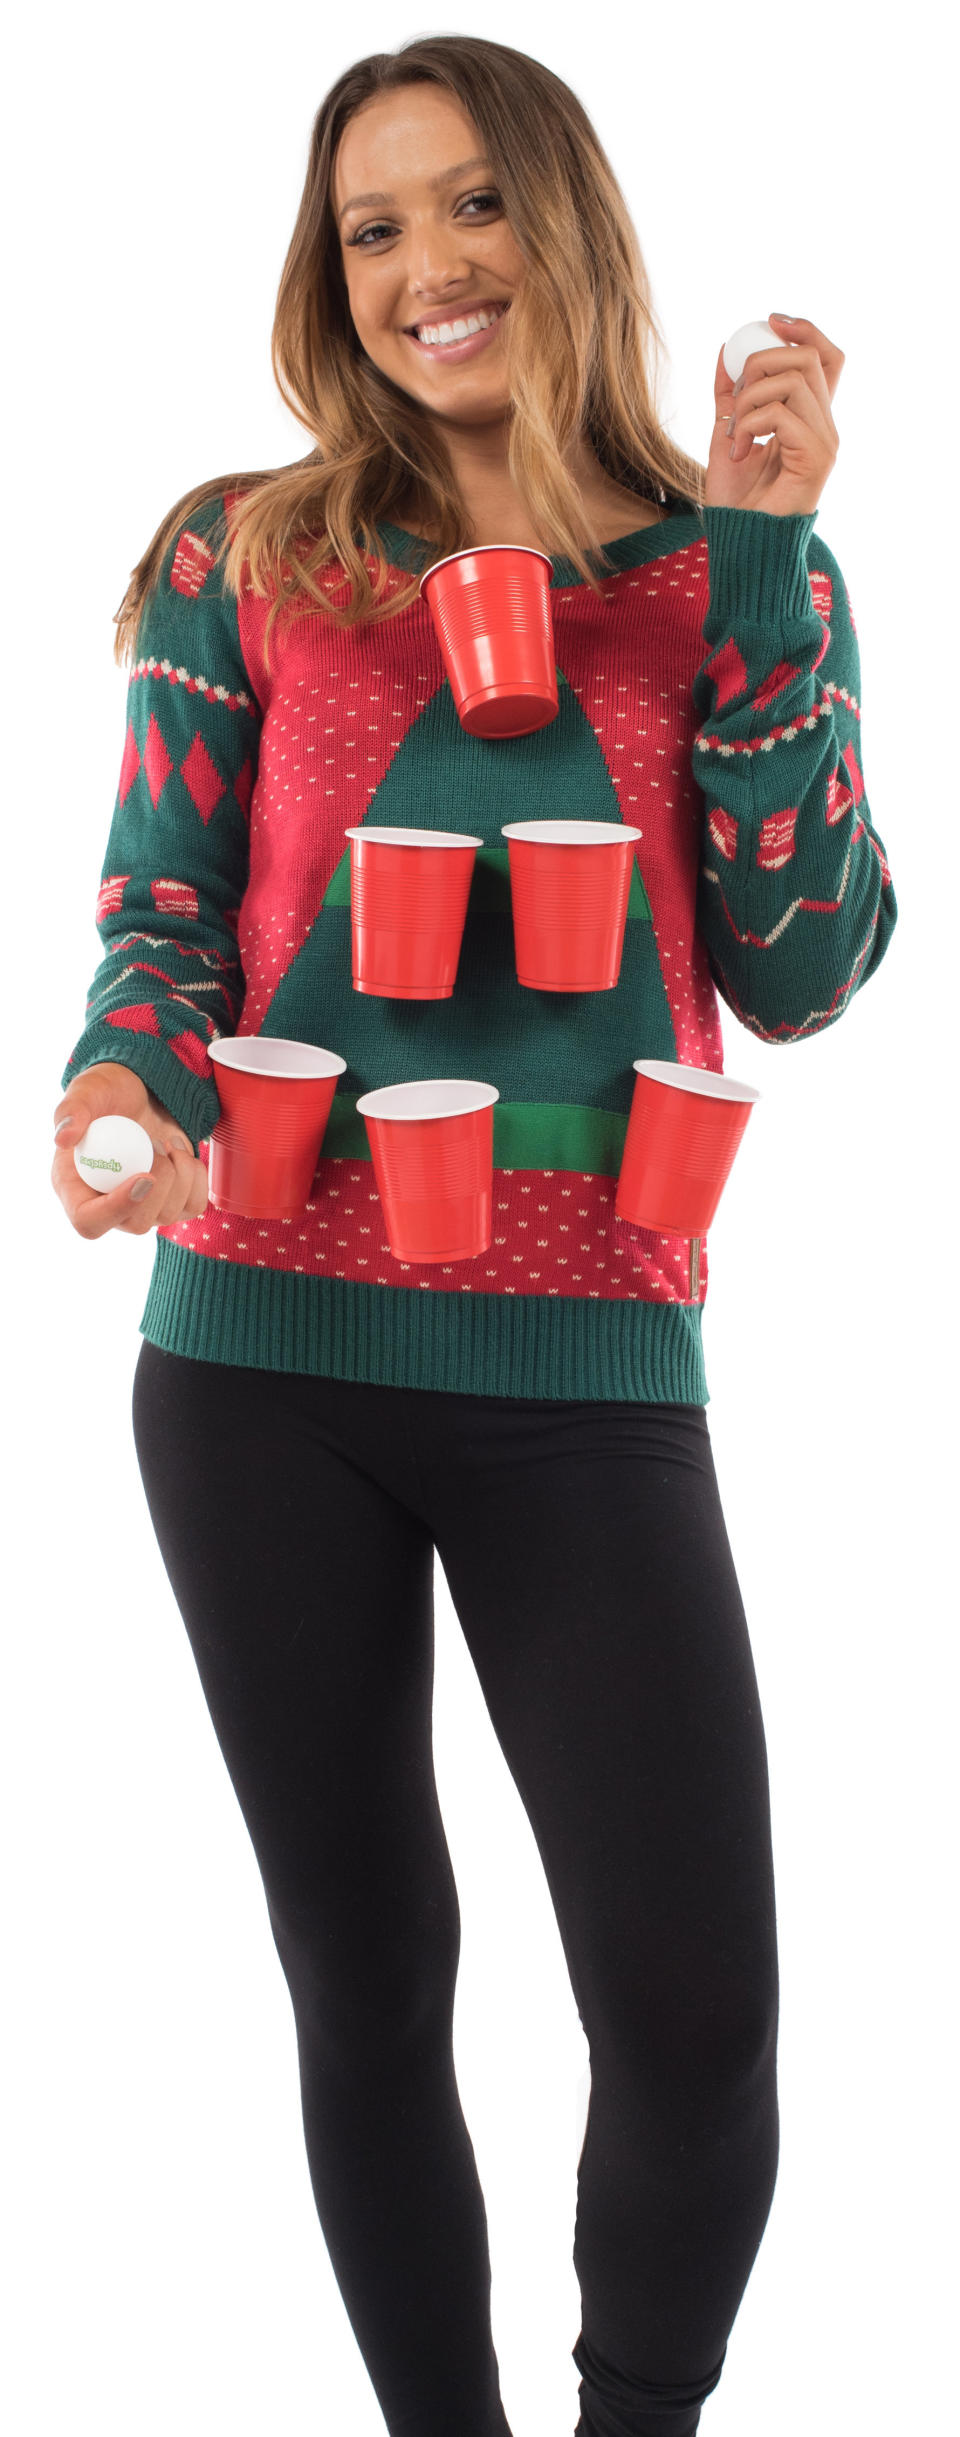 Wear this sweater and you won't go to a party, the party will come to you. Have to be honest: Having people <a href="https://www.tipsyelves.com/womens-beer-pong-christmas-sweater" target="_blank">chuck pingpong balls at you</a> is going to get old real quick.